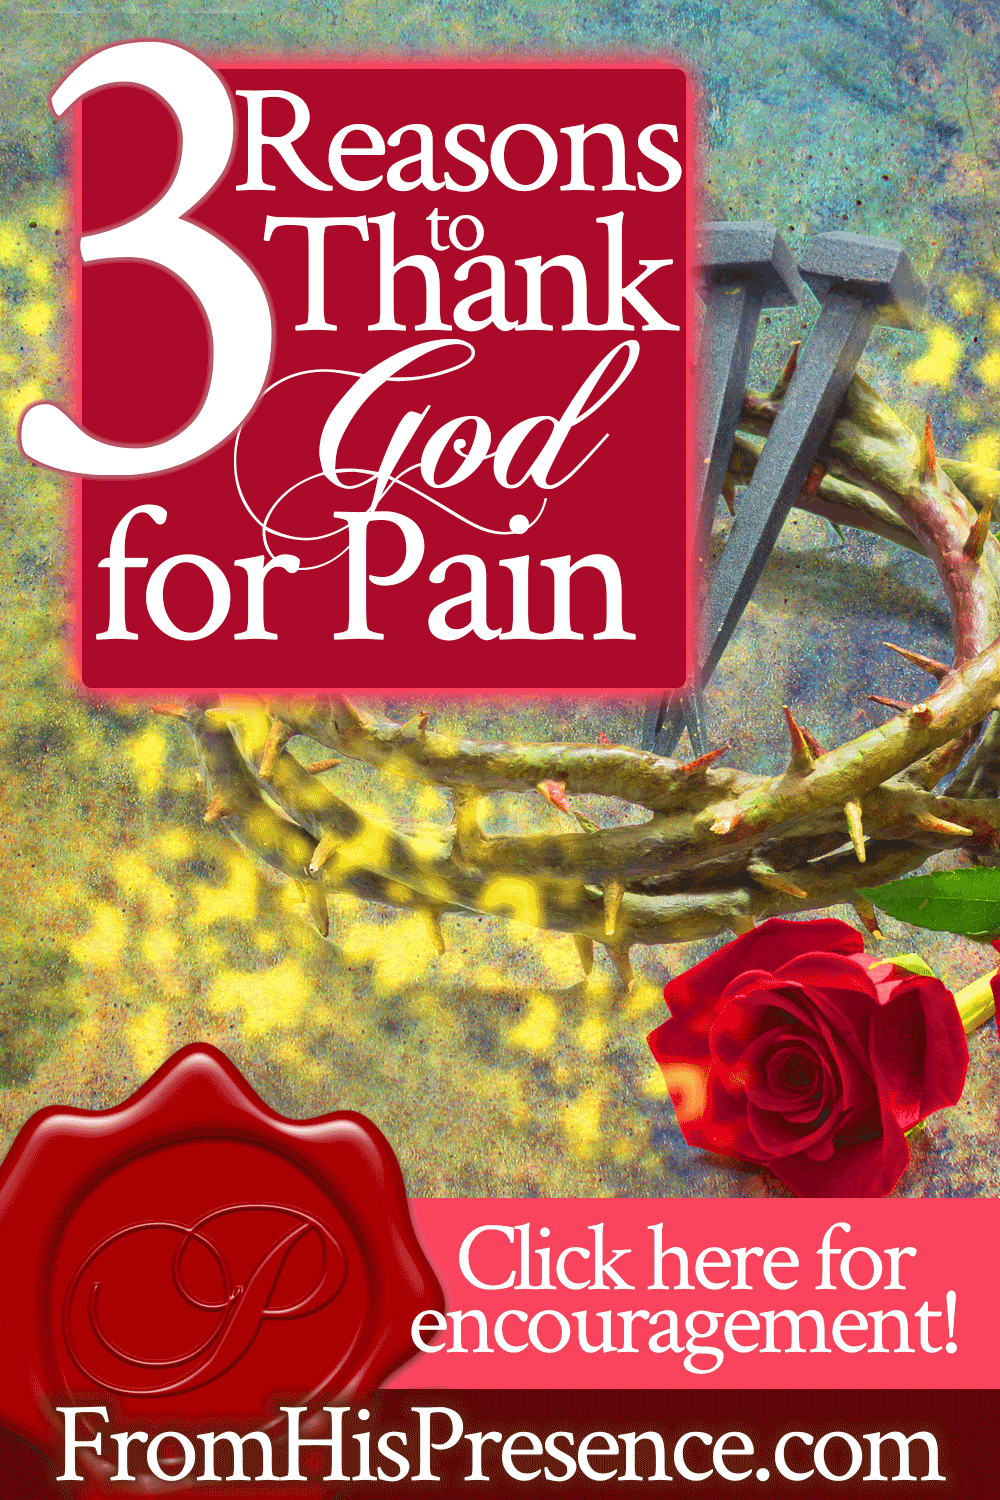 3 Reasons to Thank God for Pain | Encouraging word by Jamie Rohrbaugh | FromHisPresence.com